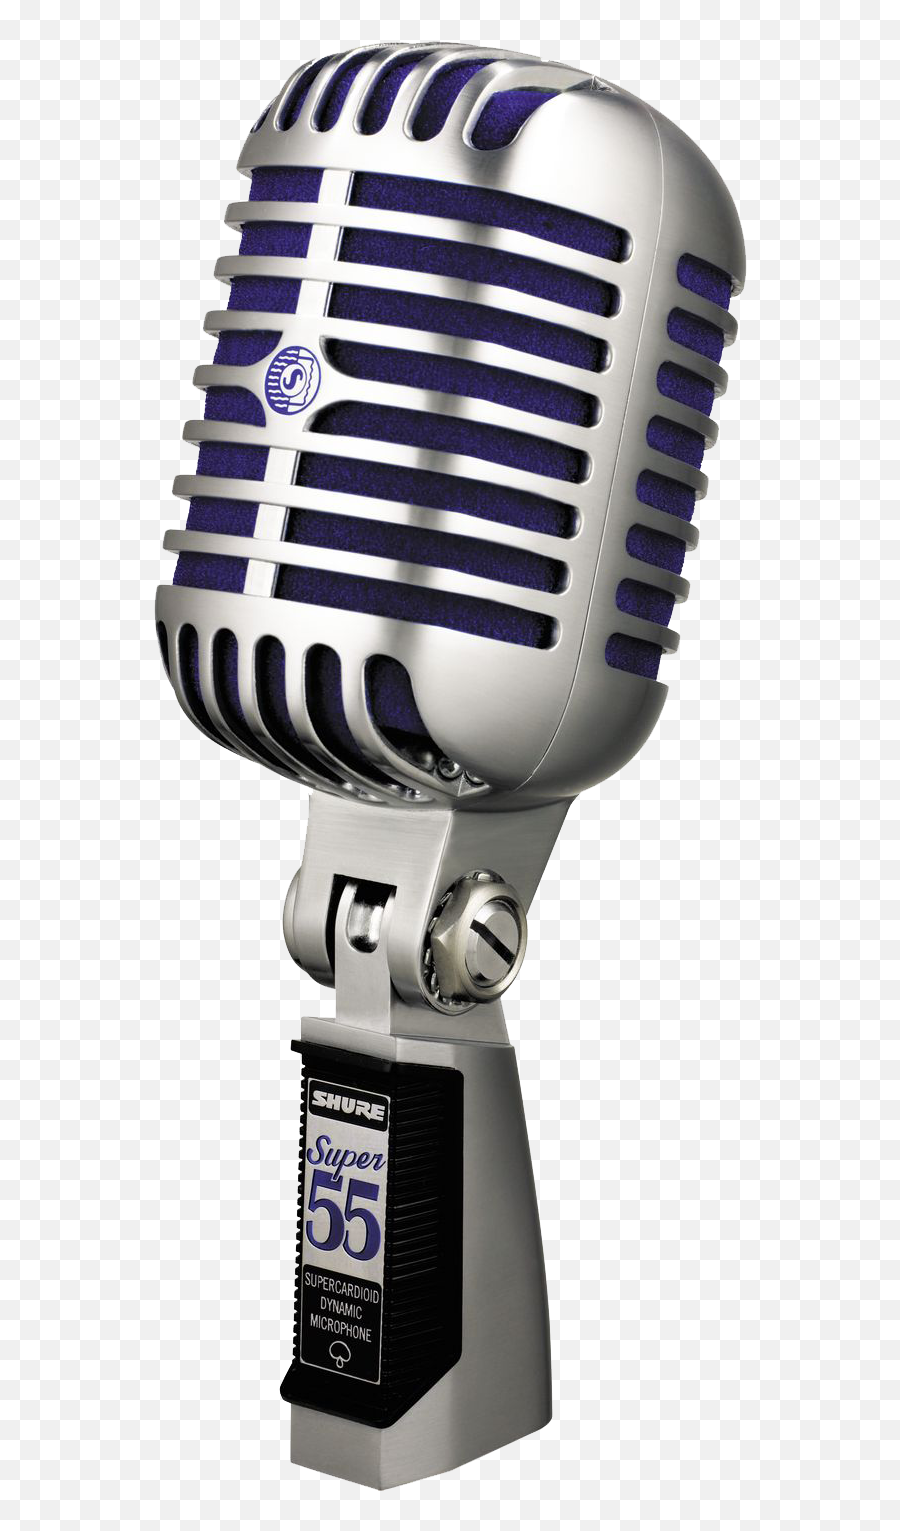 Download Mic Free Hq Png Image Freepngimg - Micro Shure Super 55,Microphone Stand Png